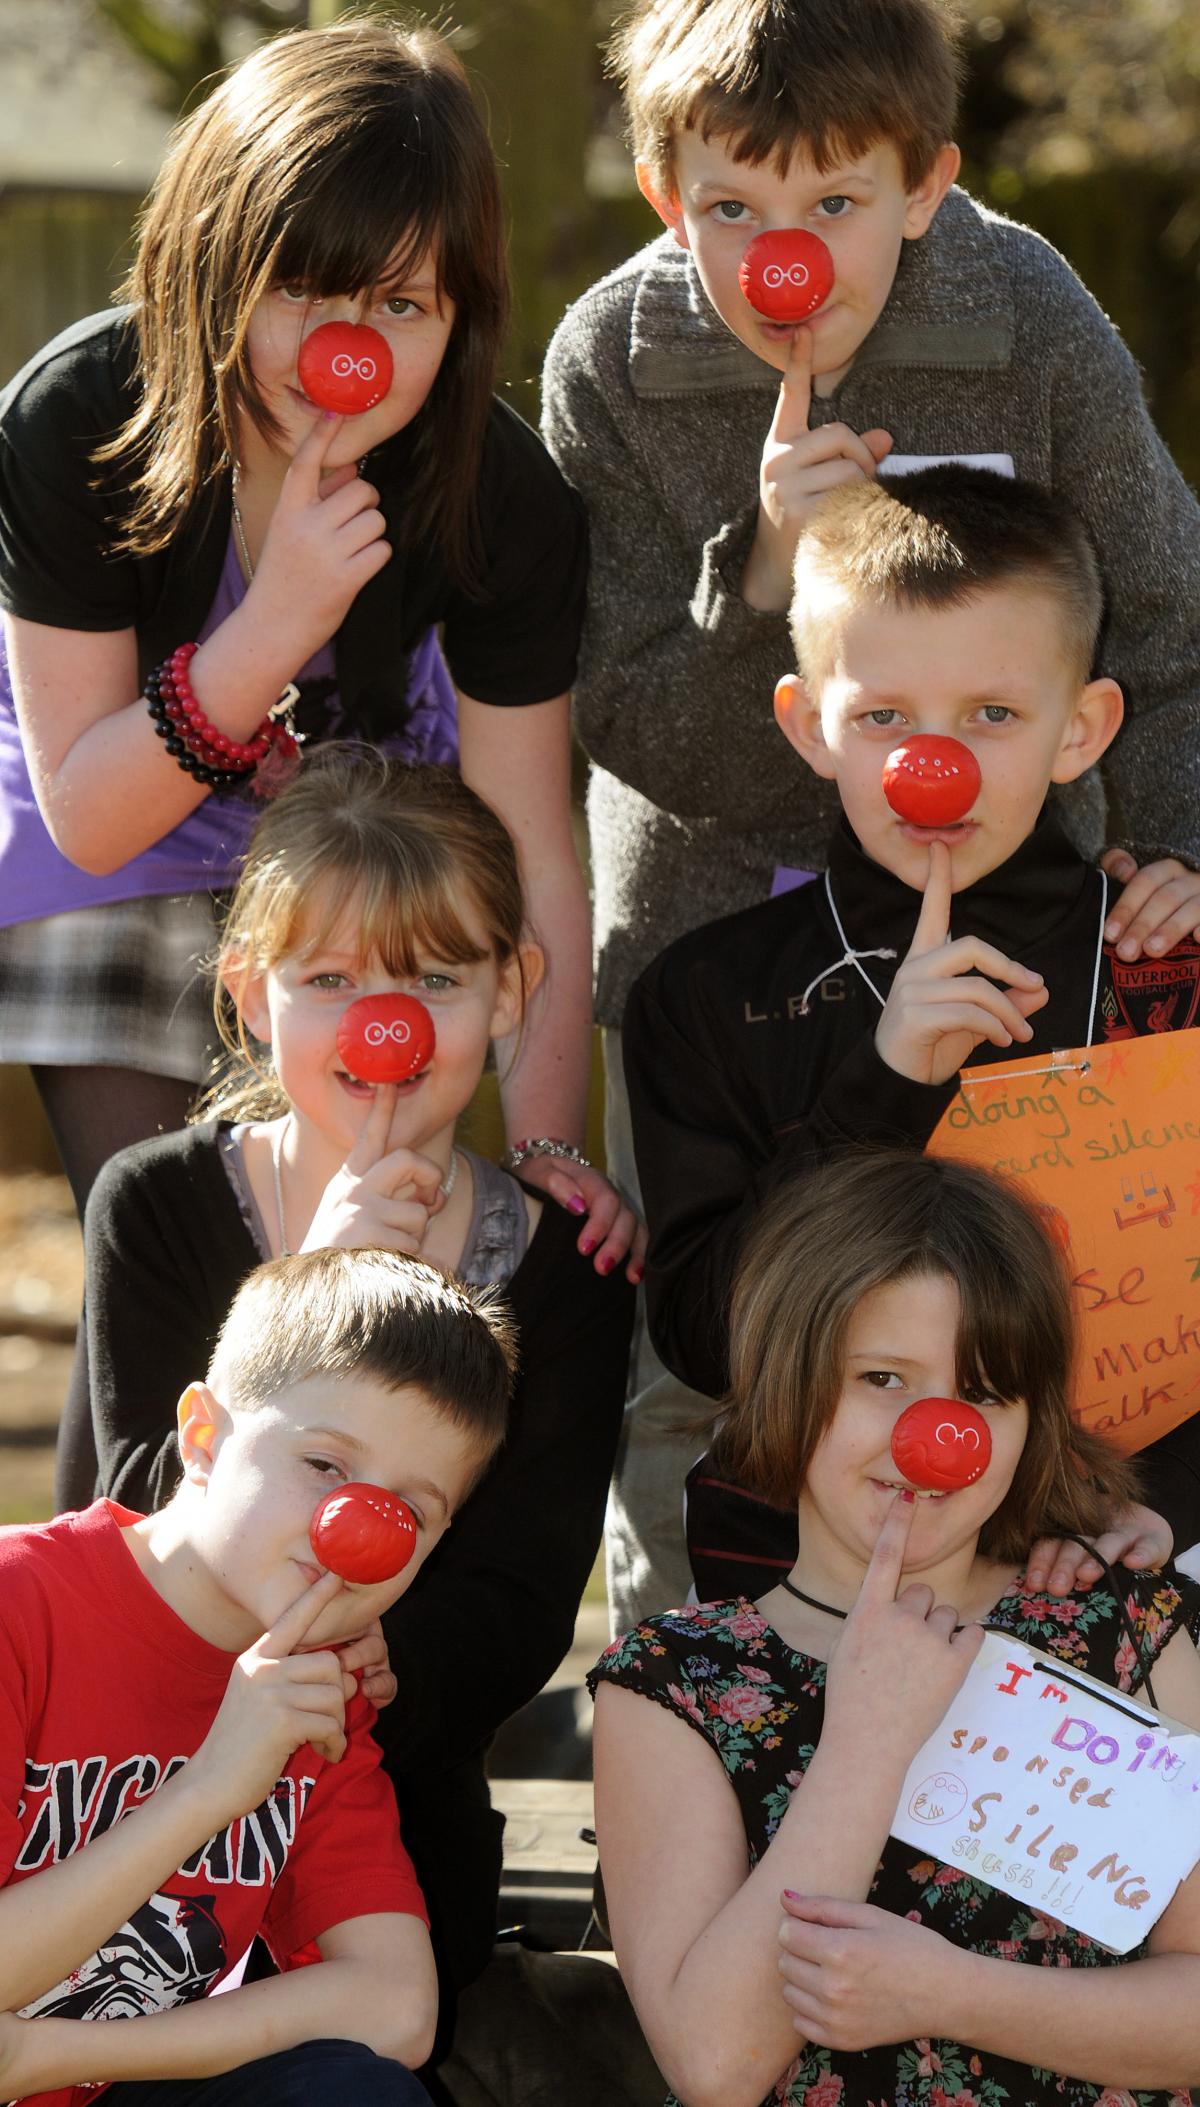 2011: Some of the Year 5 pupils at Norton Primary School who took part in a sponsored silence for Comic Relief. Pic: Mike Tipping